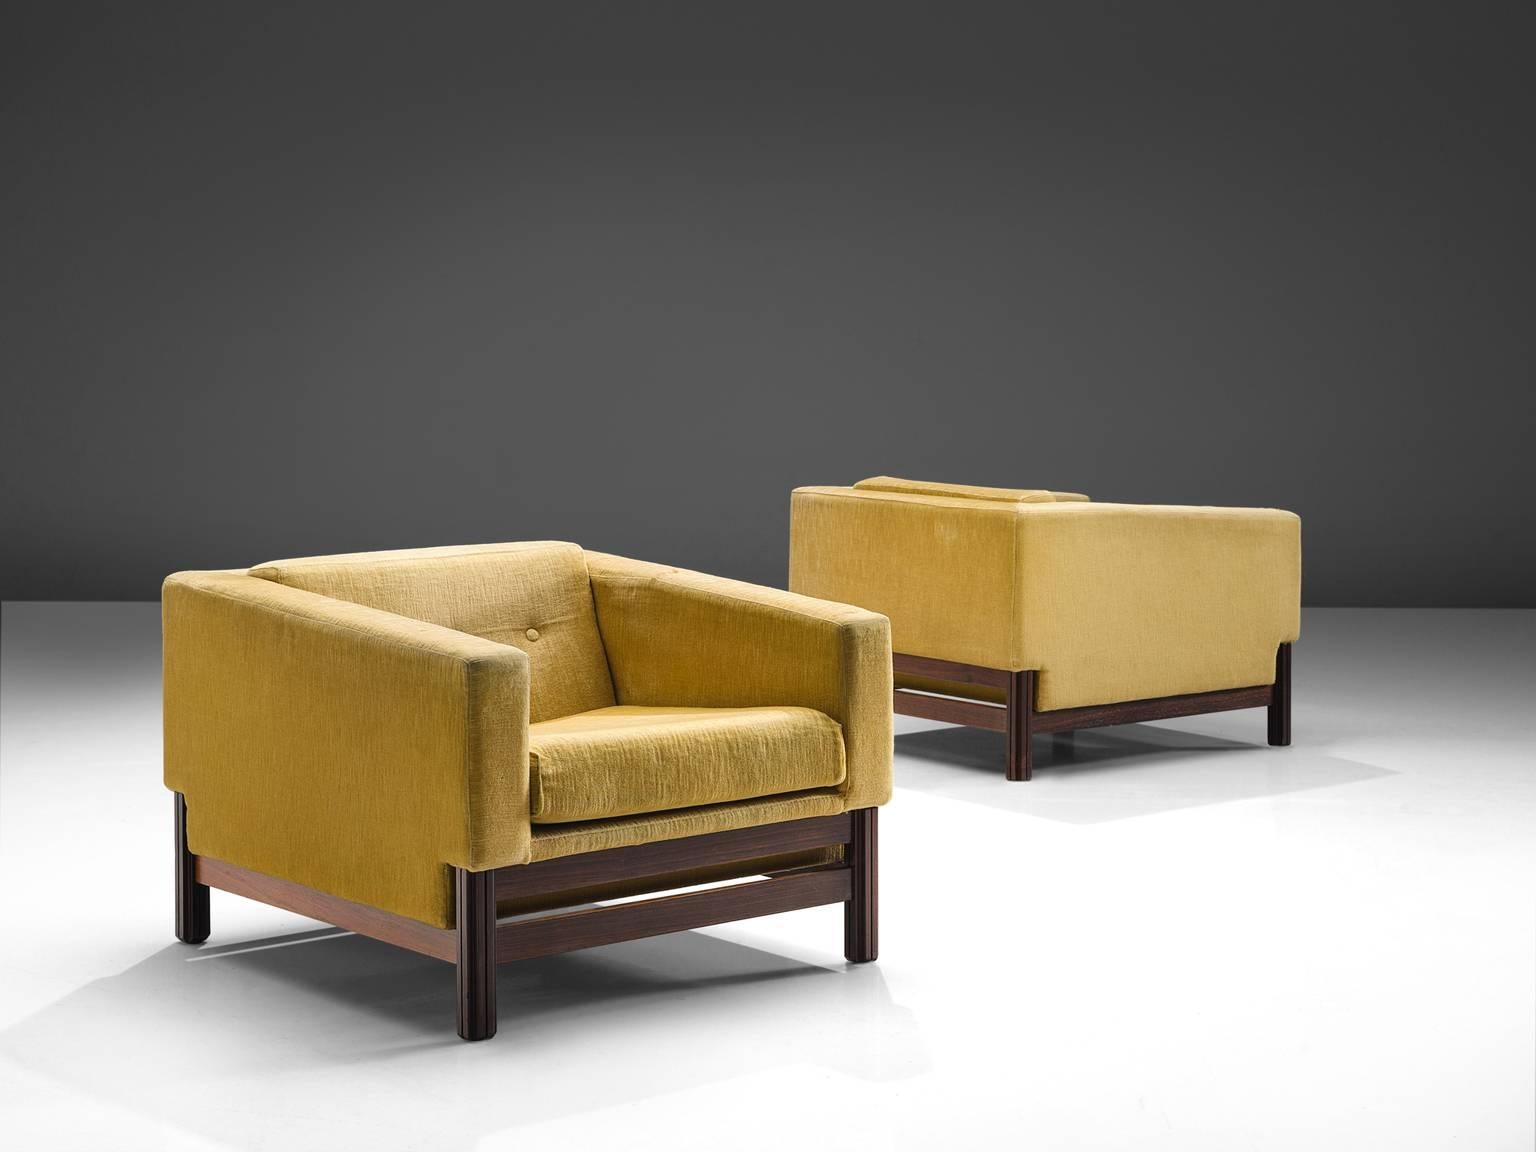 Saporiti, set of two club chairs in rosewood and yellow velvet fabric, Italy, 1960s.

These chairs, equipped with a rosewood frame still hold their original yellow upholstery. This chairs are designed in a modest, yet distinguished look. The chairs